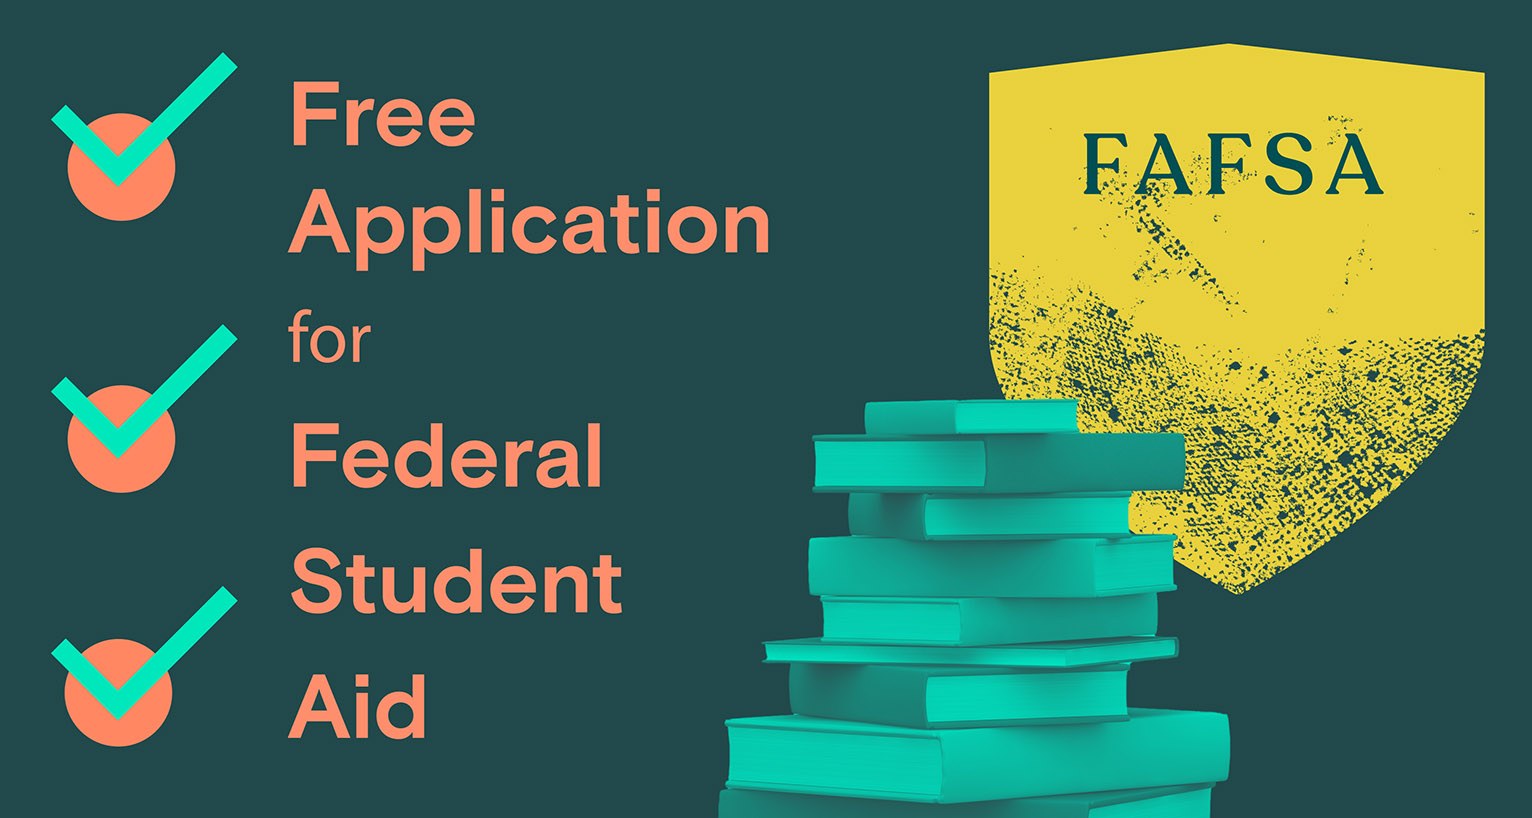 All You Need to Know to Fill Out the FAFSA WSECU